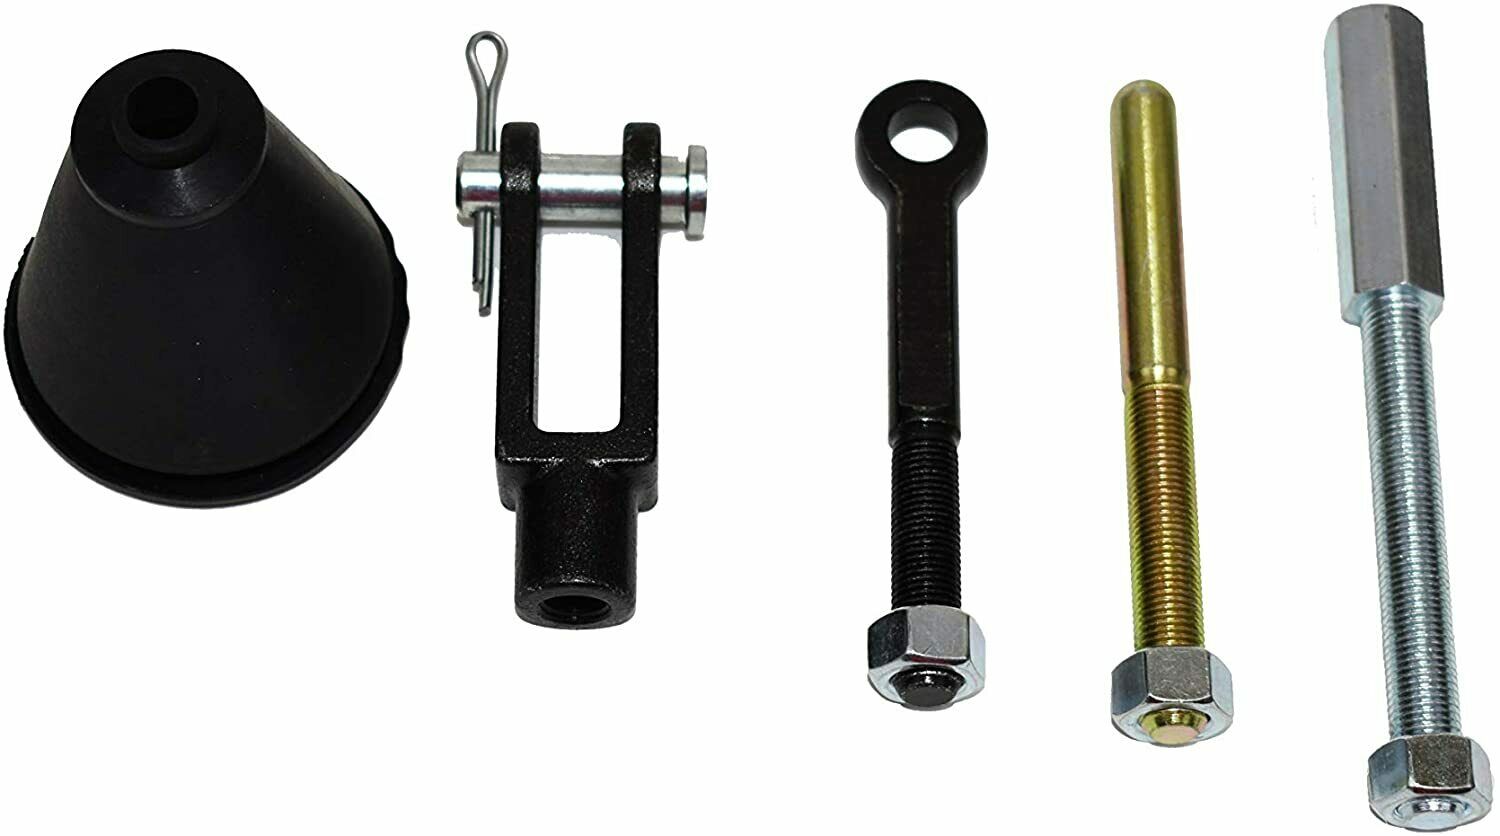 Gm Universal Manual Master Cylinder Rod Kit Chevrolet Buick Olds Quick Shipping!